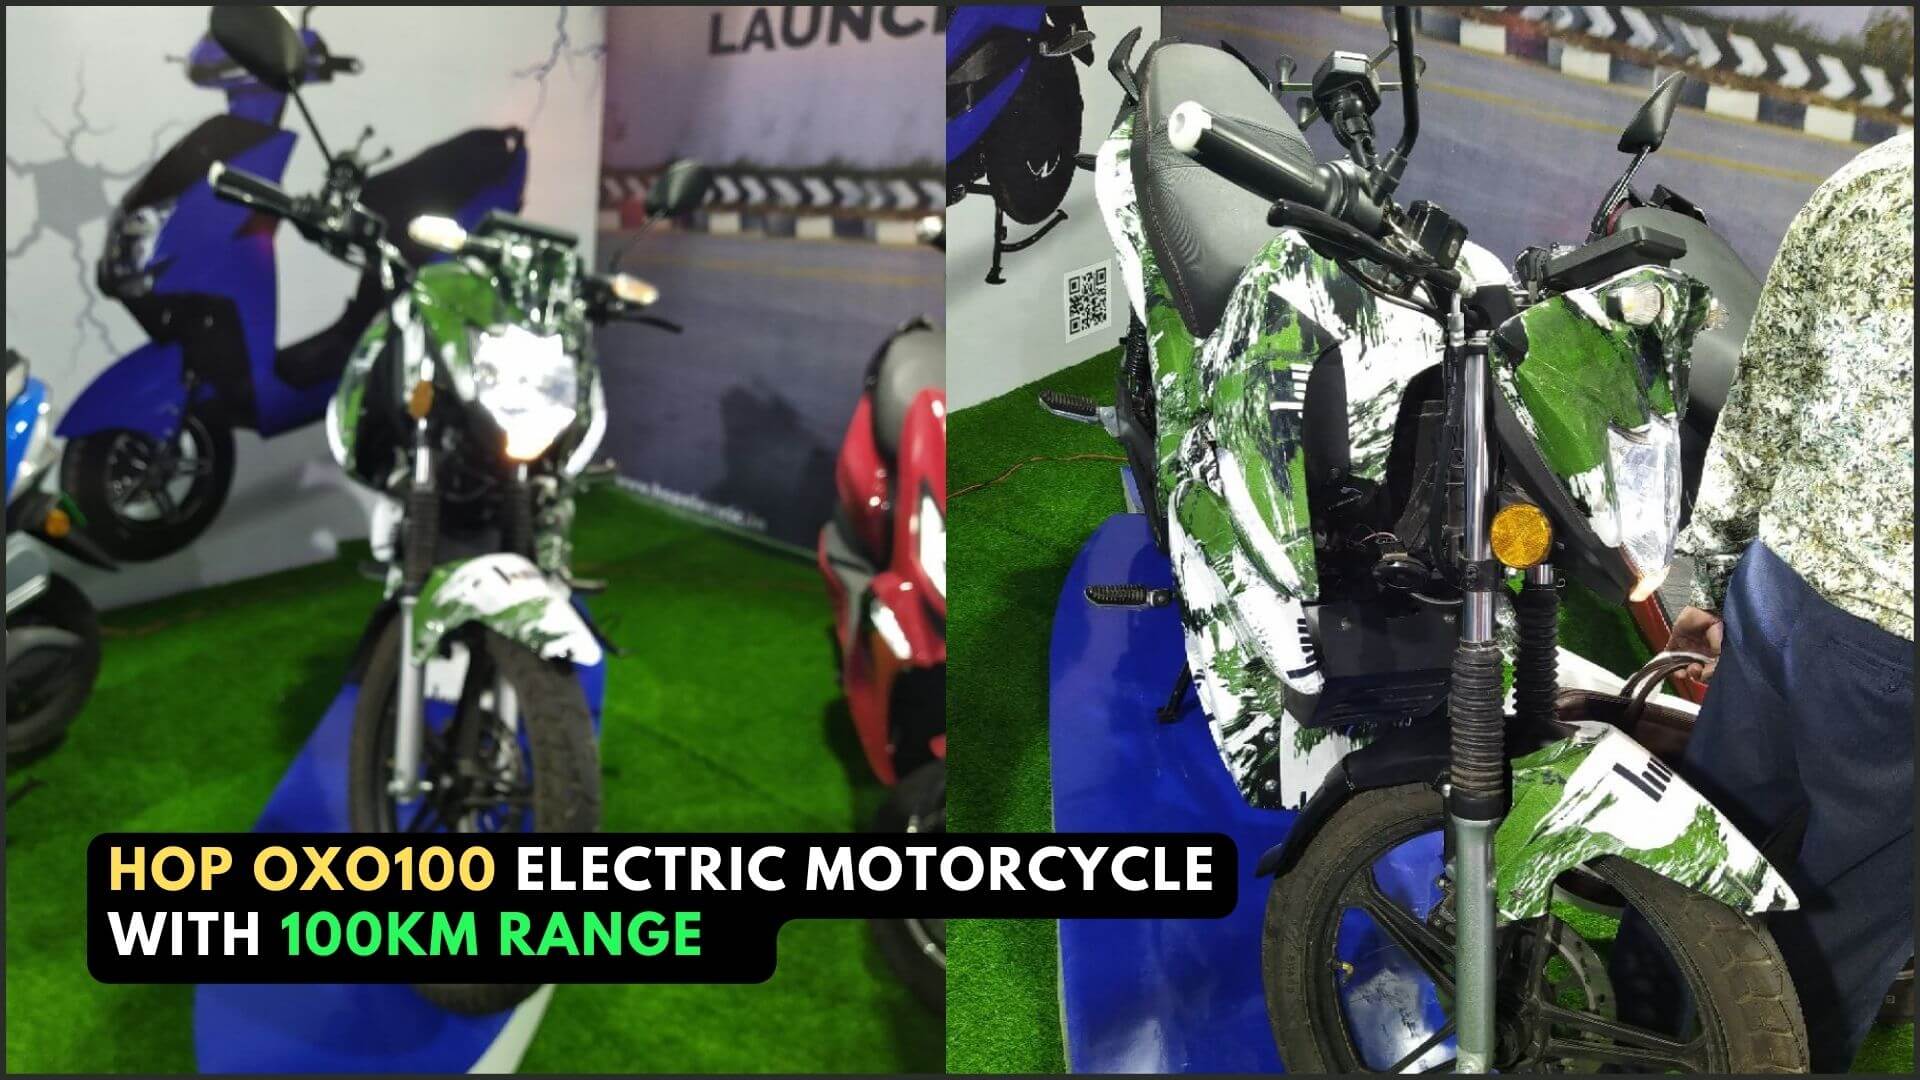 https://e-vehicleinfo.com/hop-oxo100-electric-motorcycle-price-and-launch-in-india/